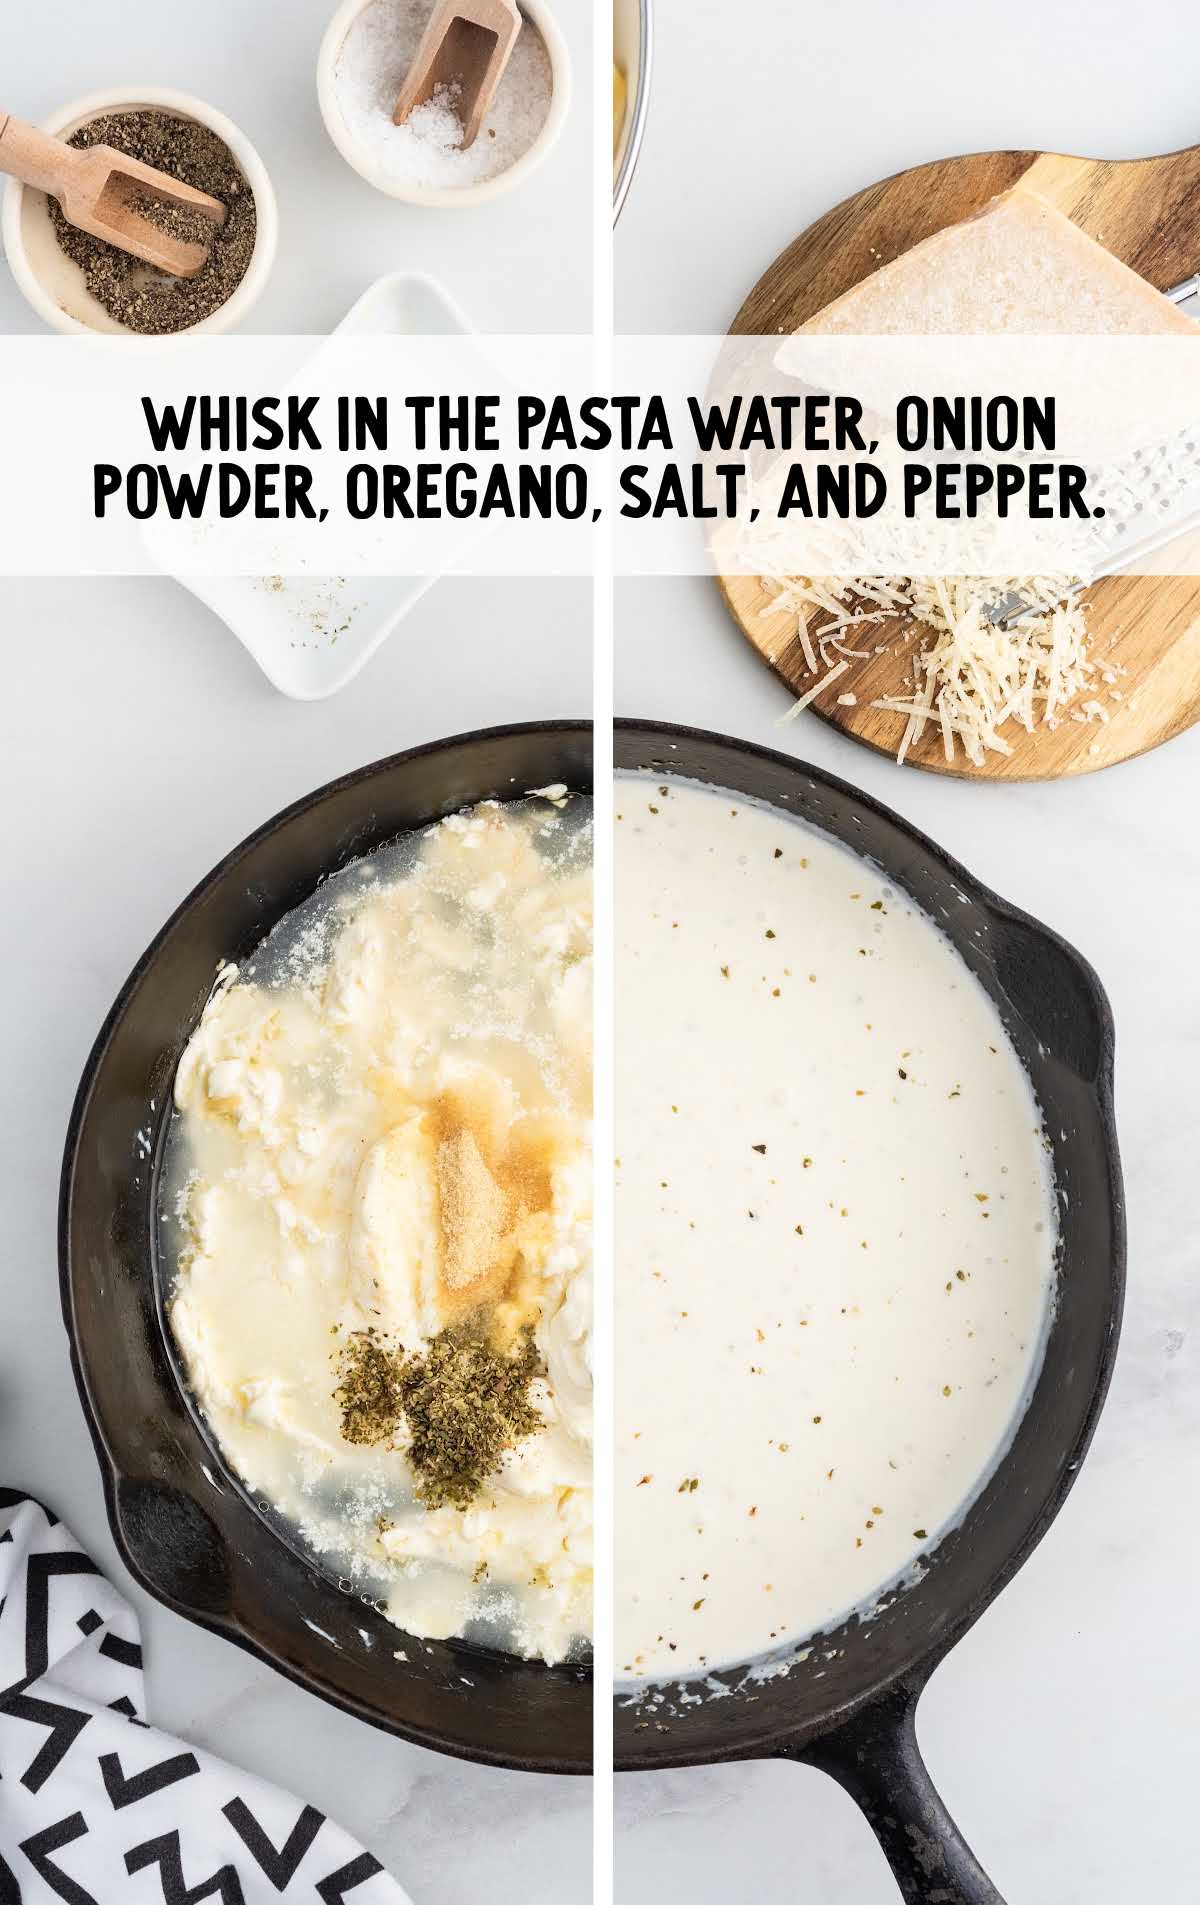 pasta water, onion powder, oregano, salt, and pepper whisked in a bowl